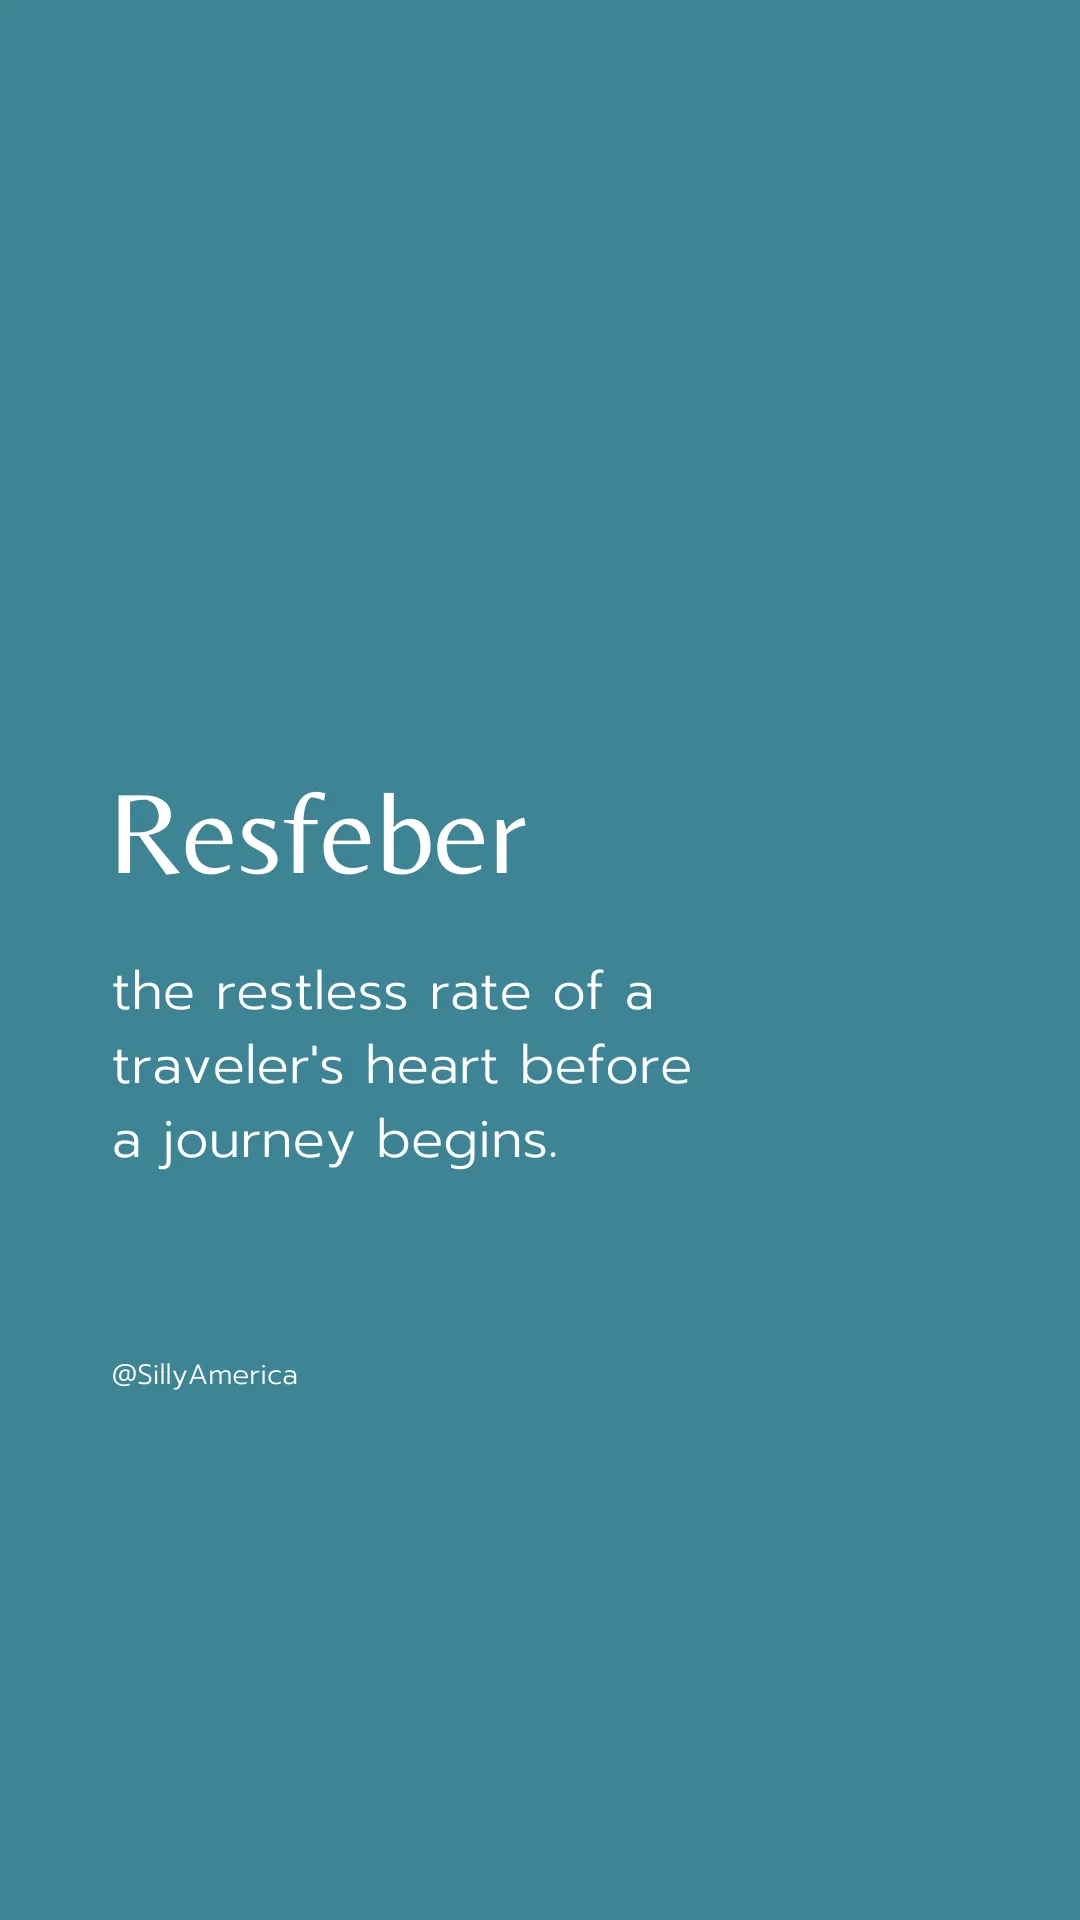 Resfeber: the restless rate of a traveler's heart before a journey begins. - Road Trip Captions for Instagram